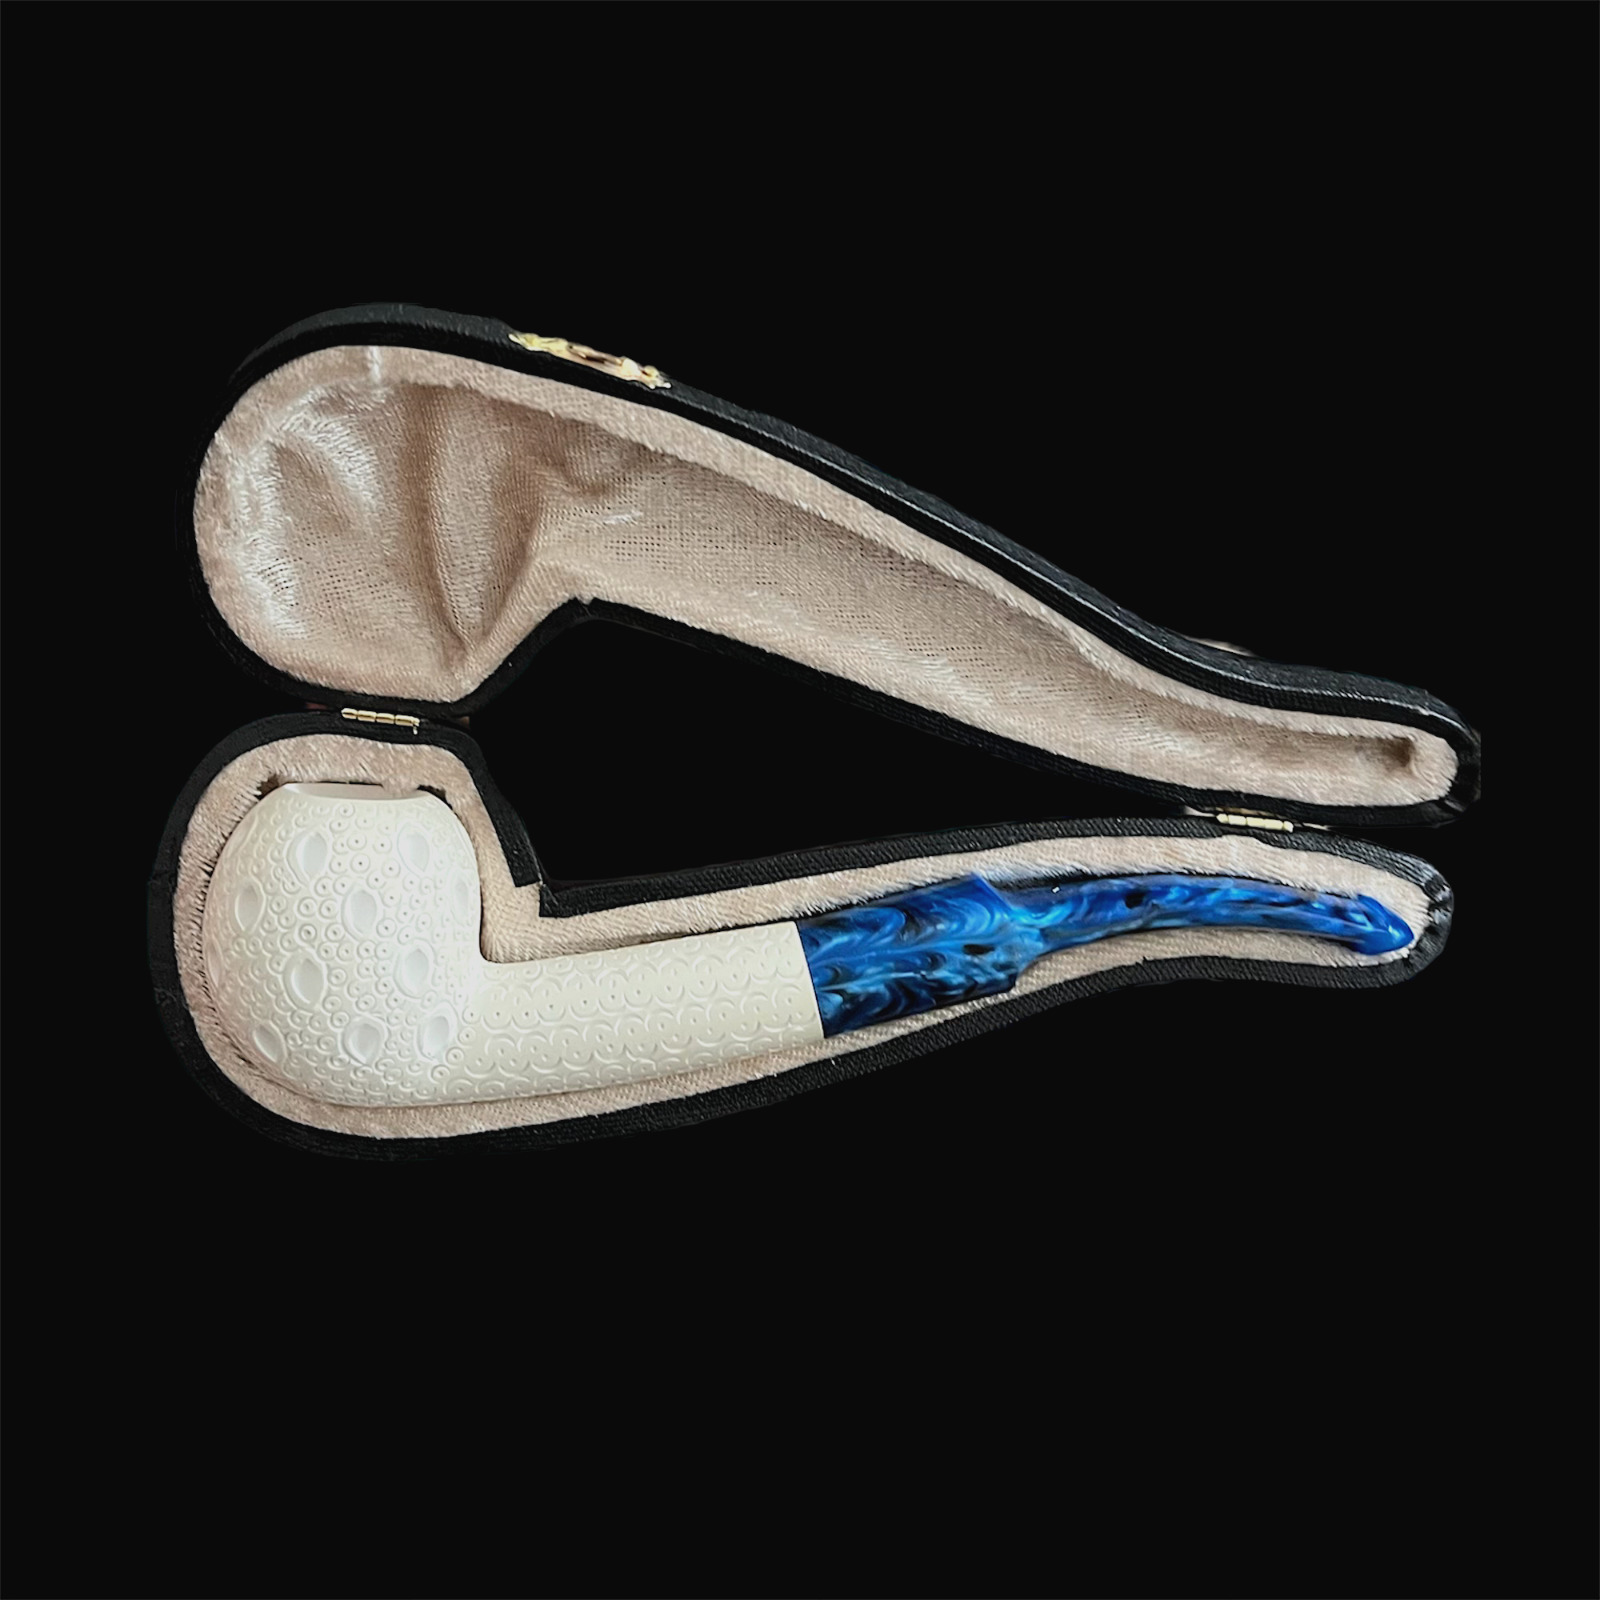 Block Meerschaum Pipe handcarved new smoking tobacco pipe unsmoked w case MD-416